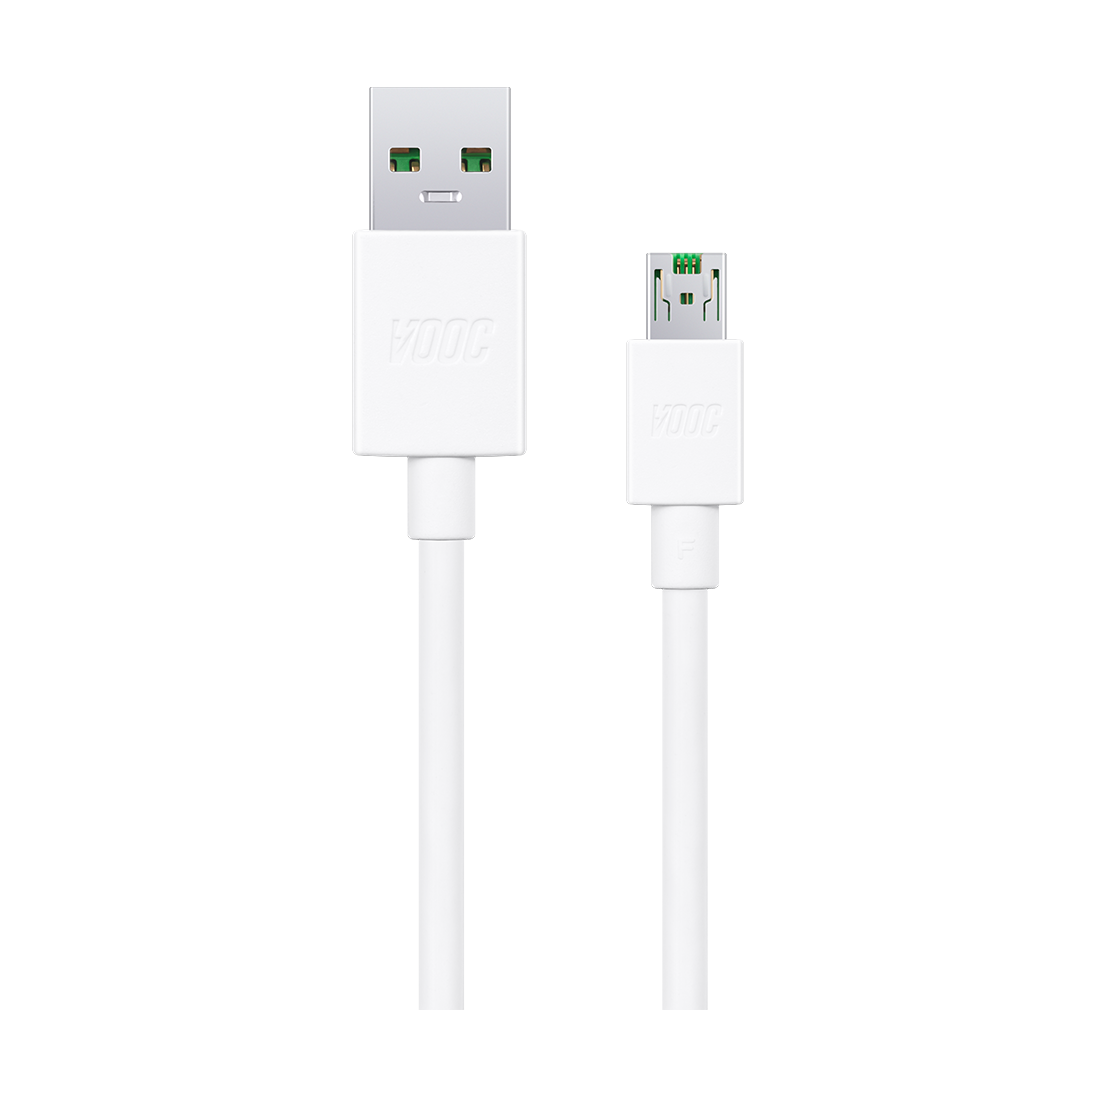 OPPO VOOC Micro USB Cable